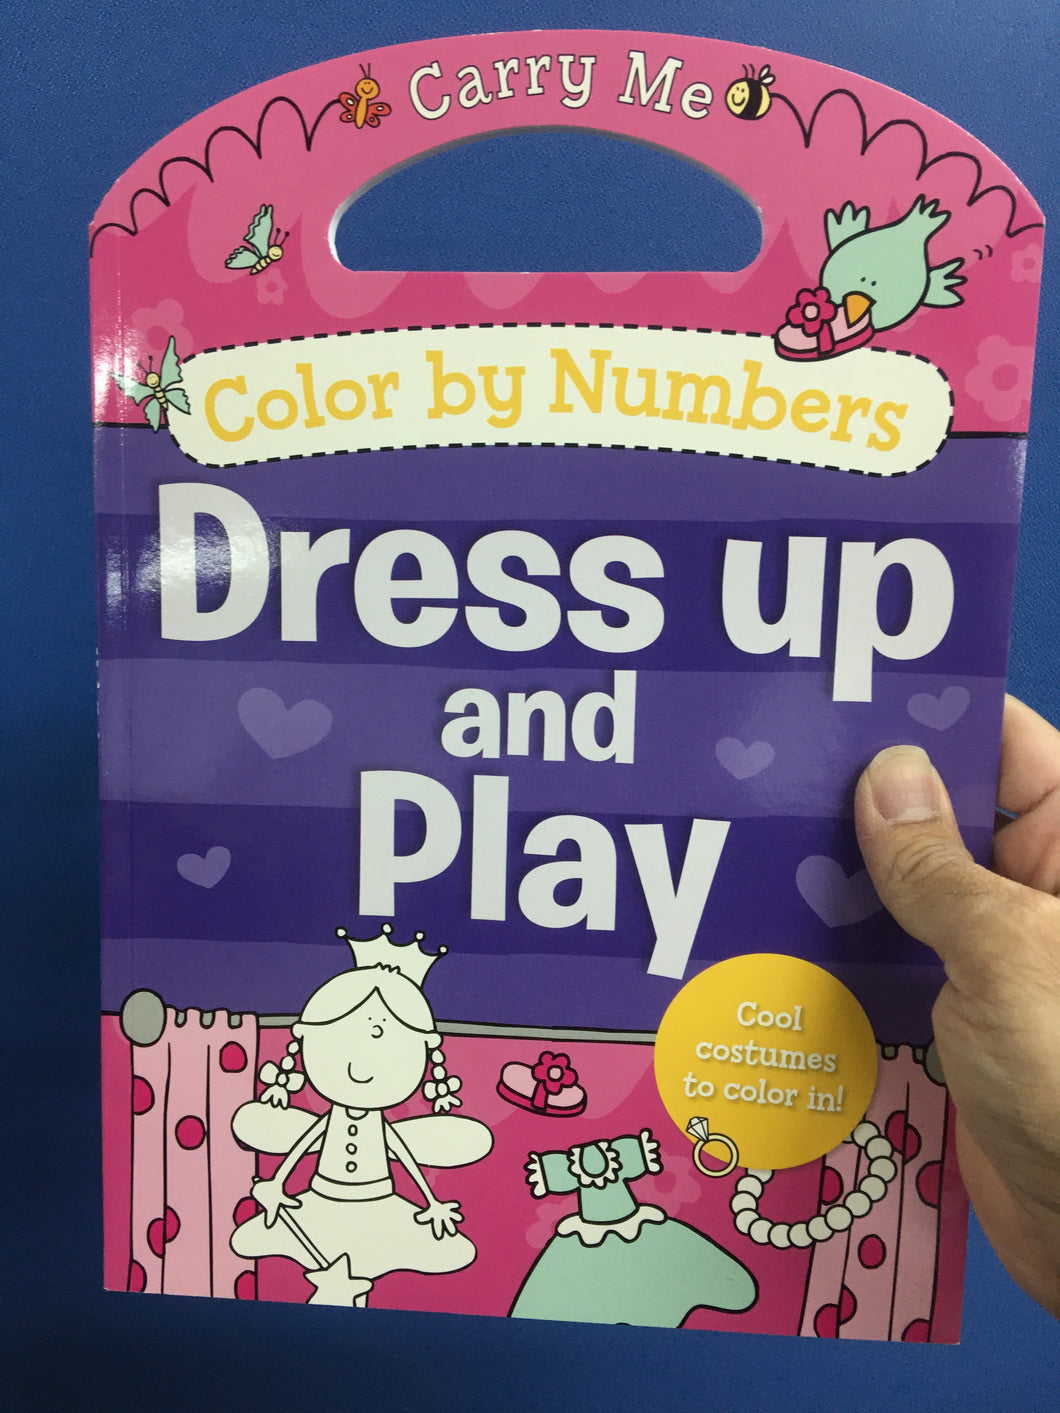 Carry me Colouring Dress Up Play